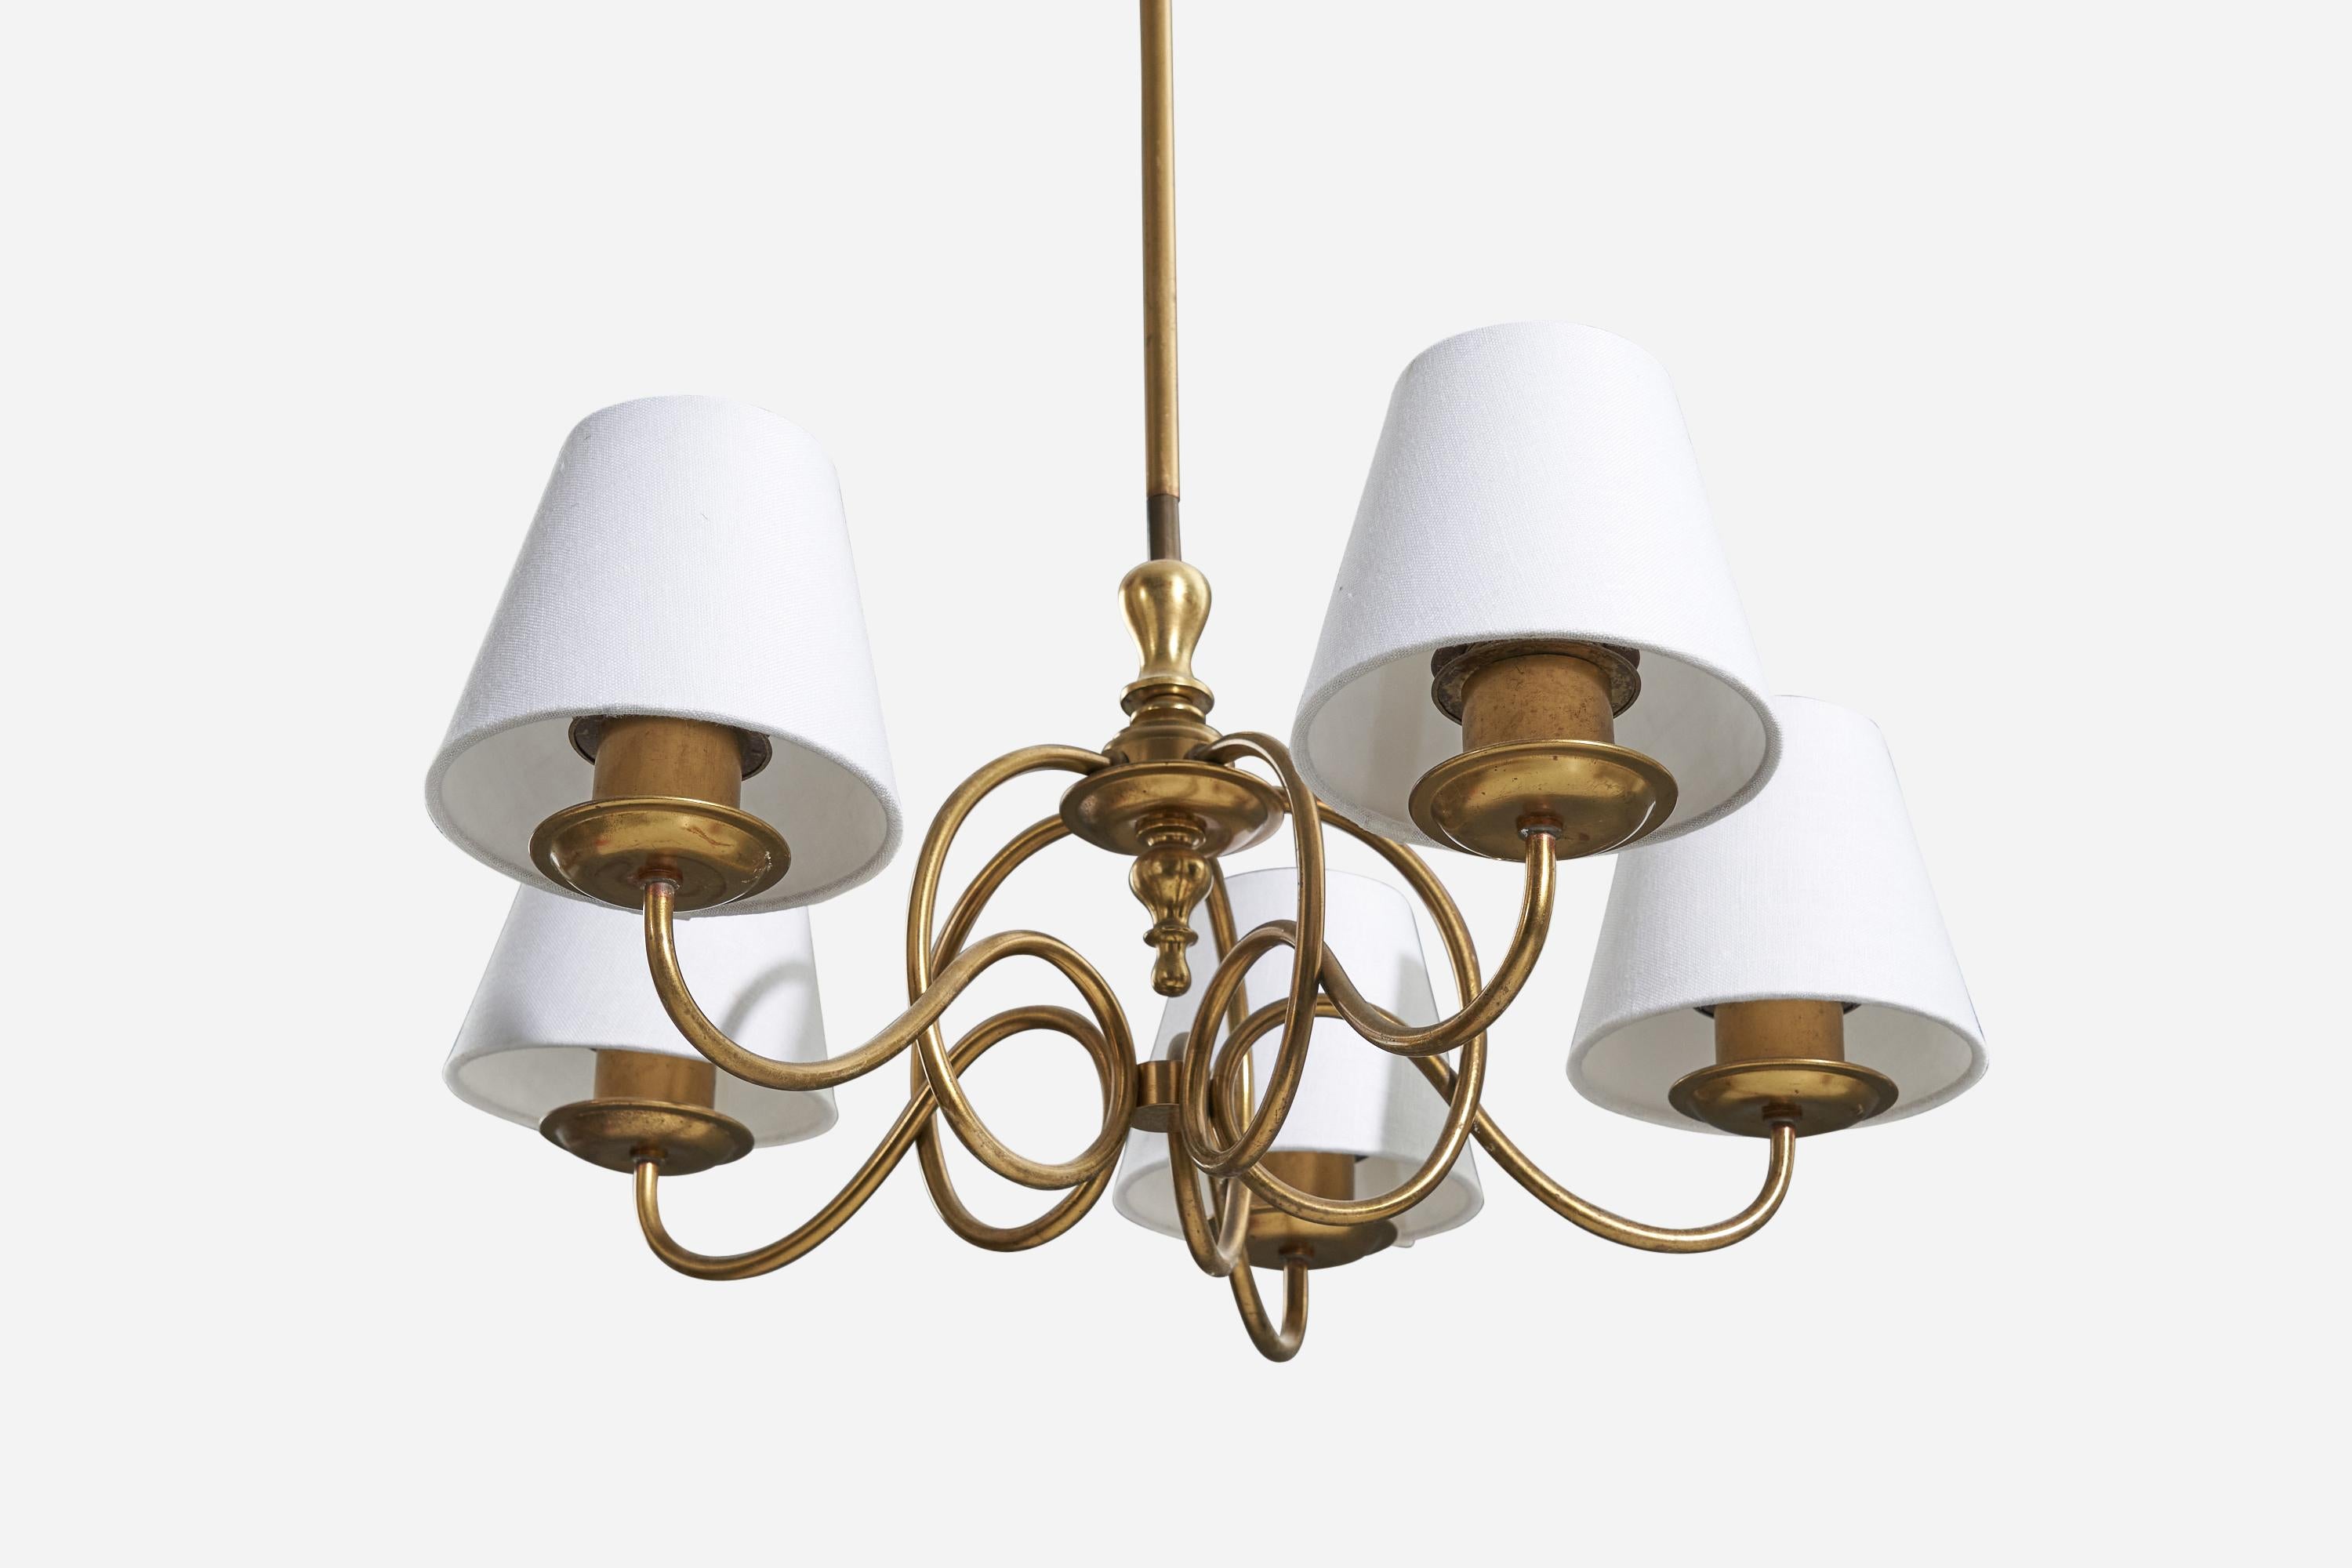 A brass and white fabric, five-armed chandelier, designed and produced in Sweden, 1940s. 

Sold with lampshades. 
Dimensions of Lamp (inches) : 24.375 x 16.375 x 16.375 (H x W x D)
Dimensions of Shades (inches) : 3 x 5.125 x 4.5 (T x B x